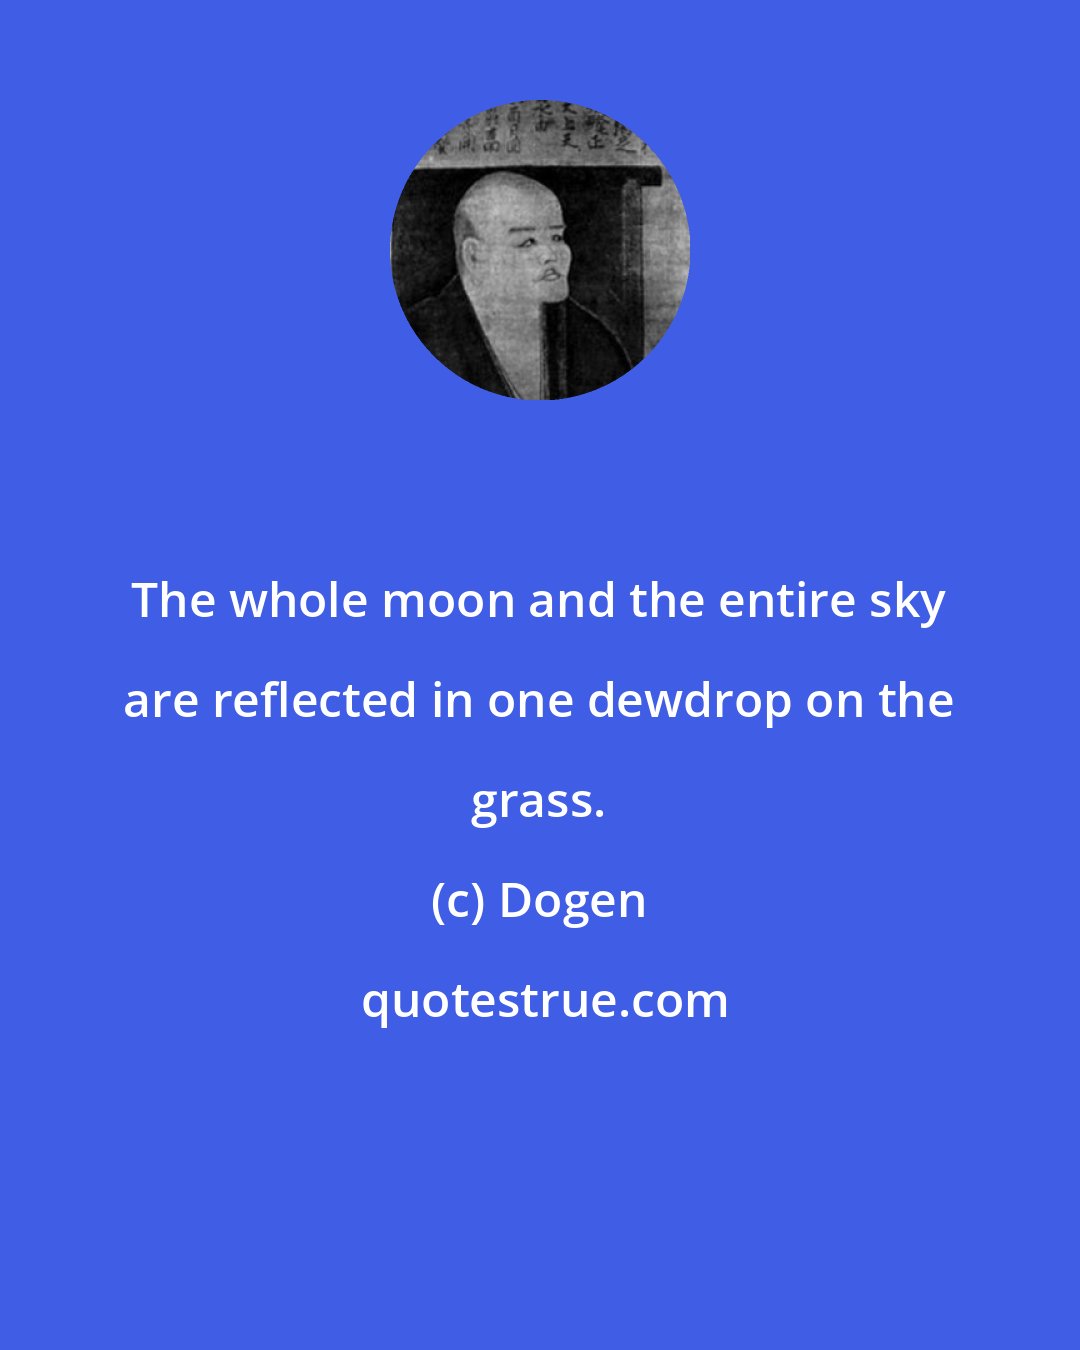 Dogen: The whole moon and the entire sky are reflected in one dewdrop on the grass.